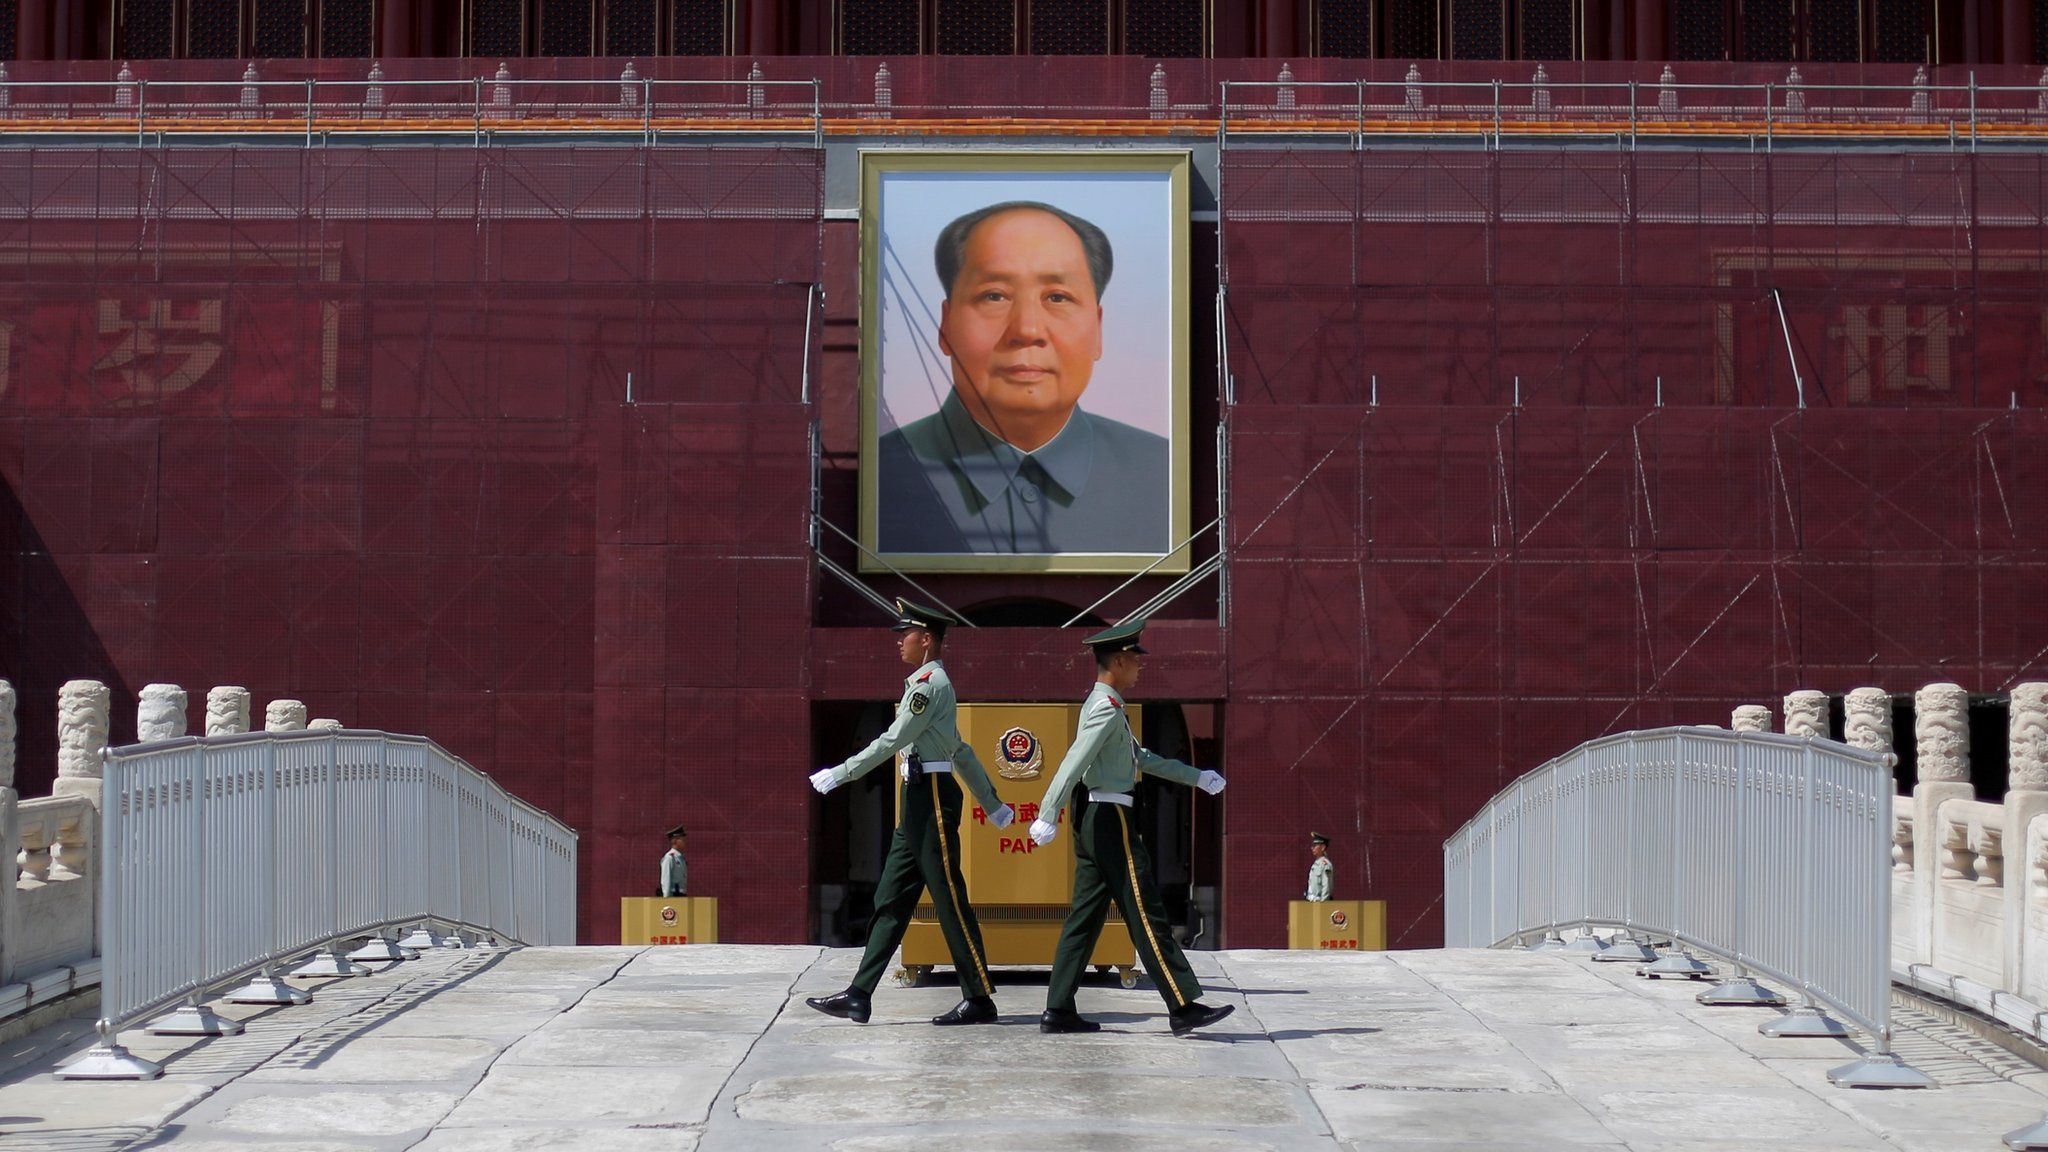 Paramilitary officers change guard in front of the portrait of the late Chinese chairman Mao Zedong in Tiananmen Square in Beijing, China May 7, 2019